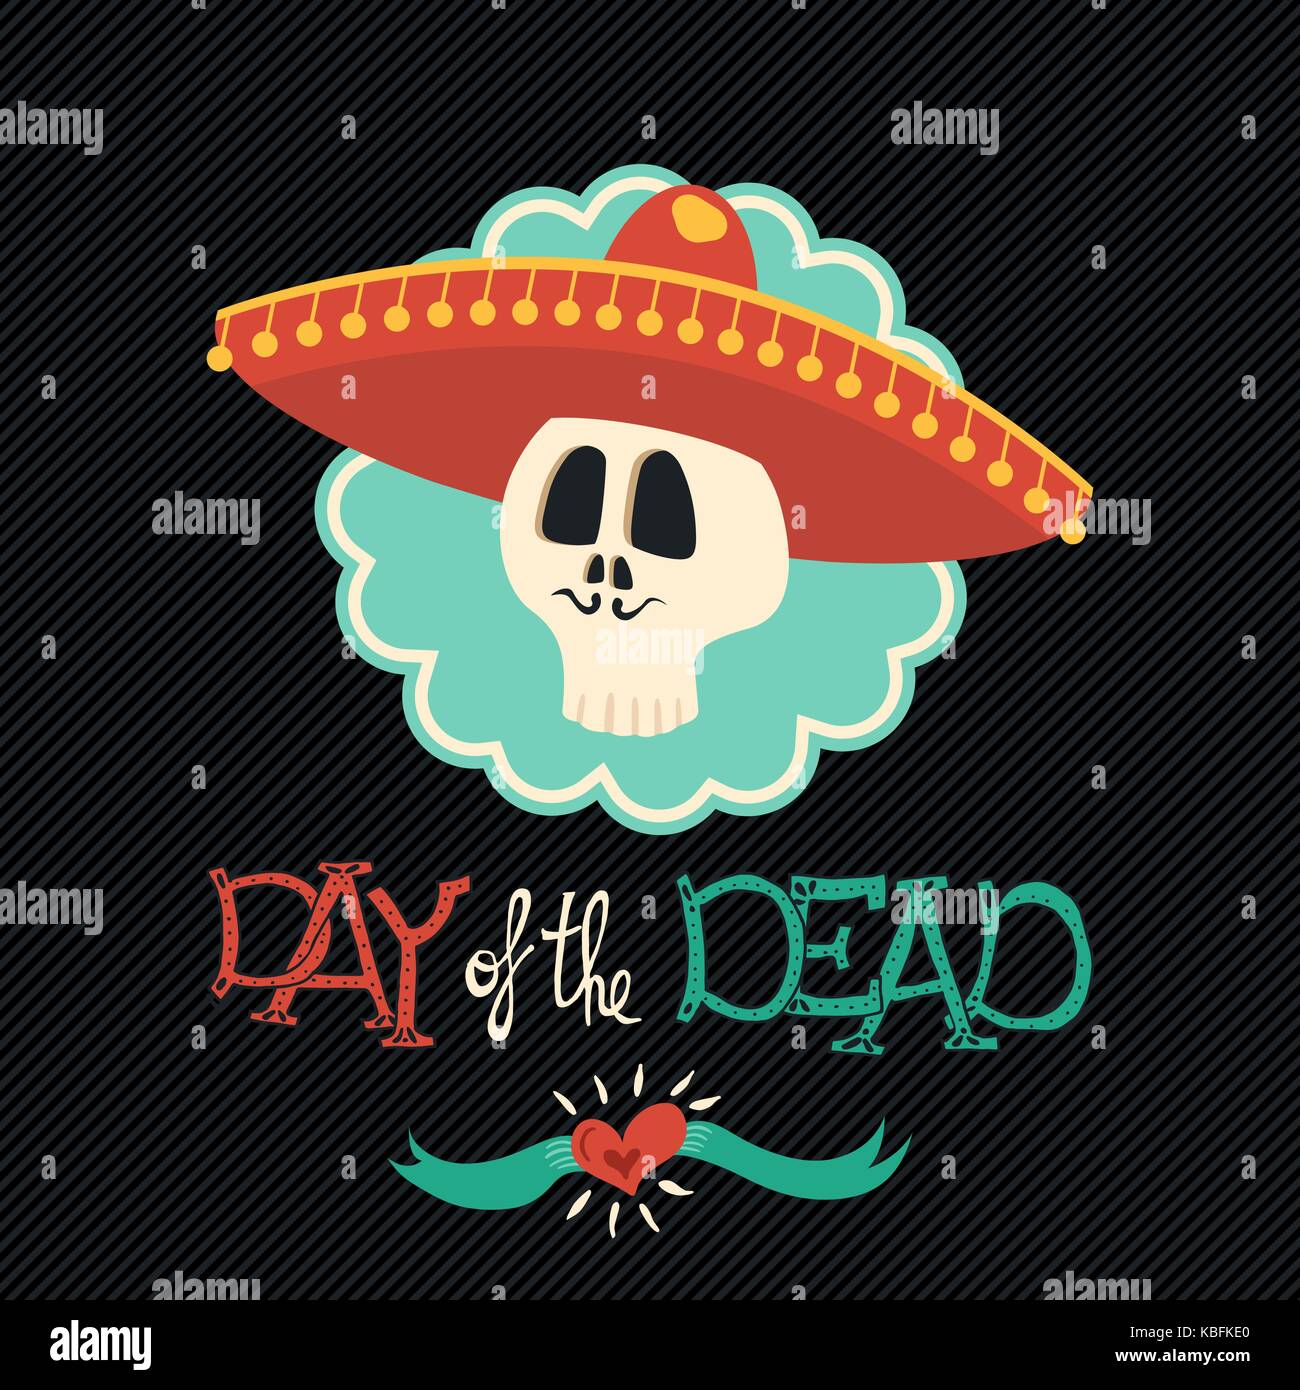 Day of the dead mariachi sugar skull illustration for mexican celebration, traditional hand drawn mexico skeleton with hat and mustache. EPS10 vector. Stock Vector